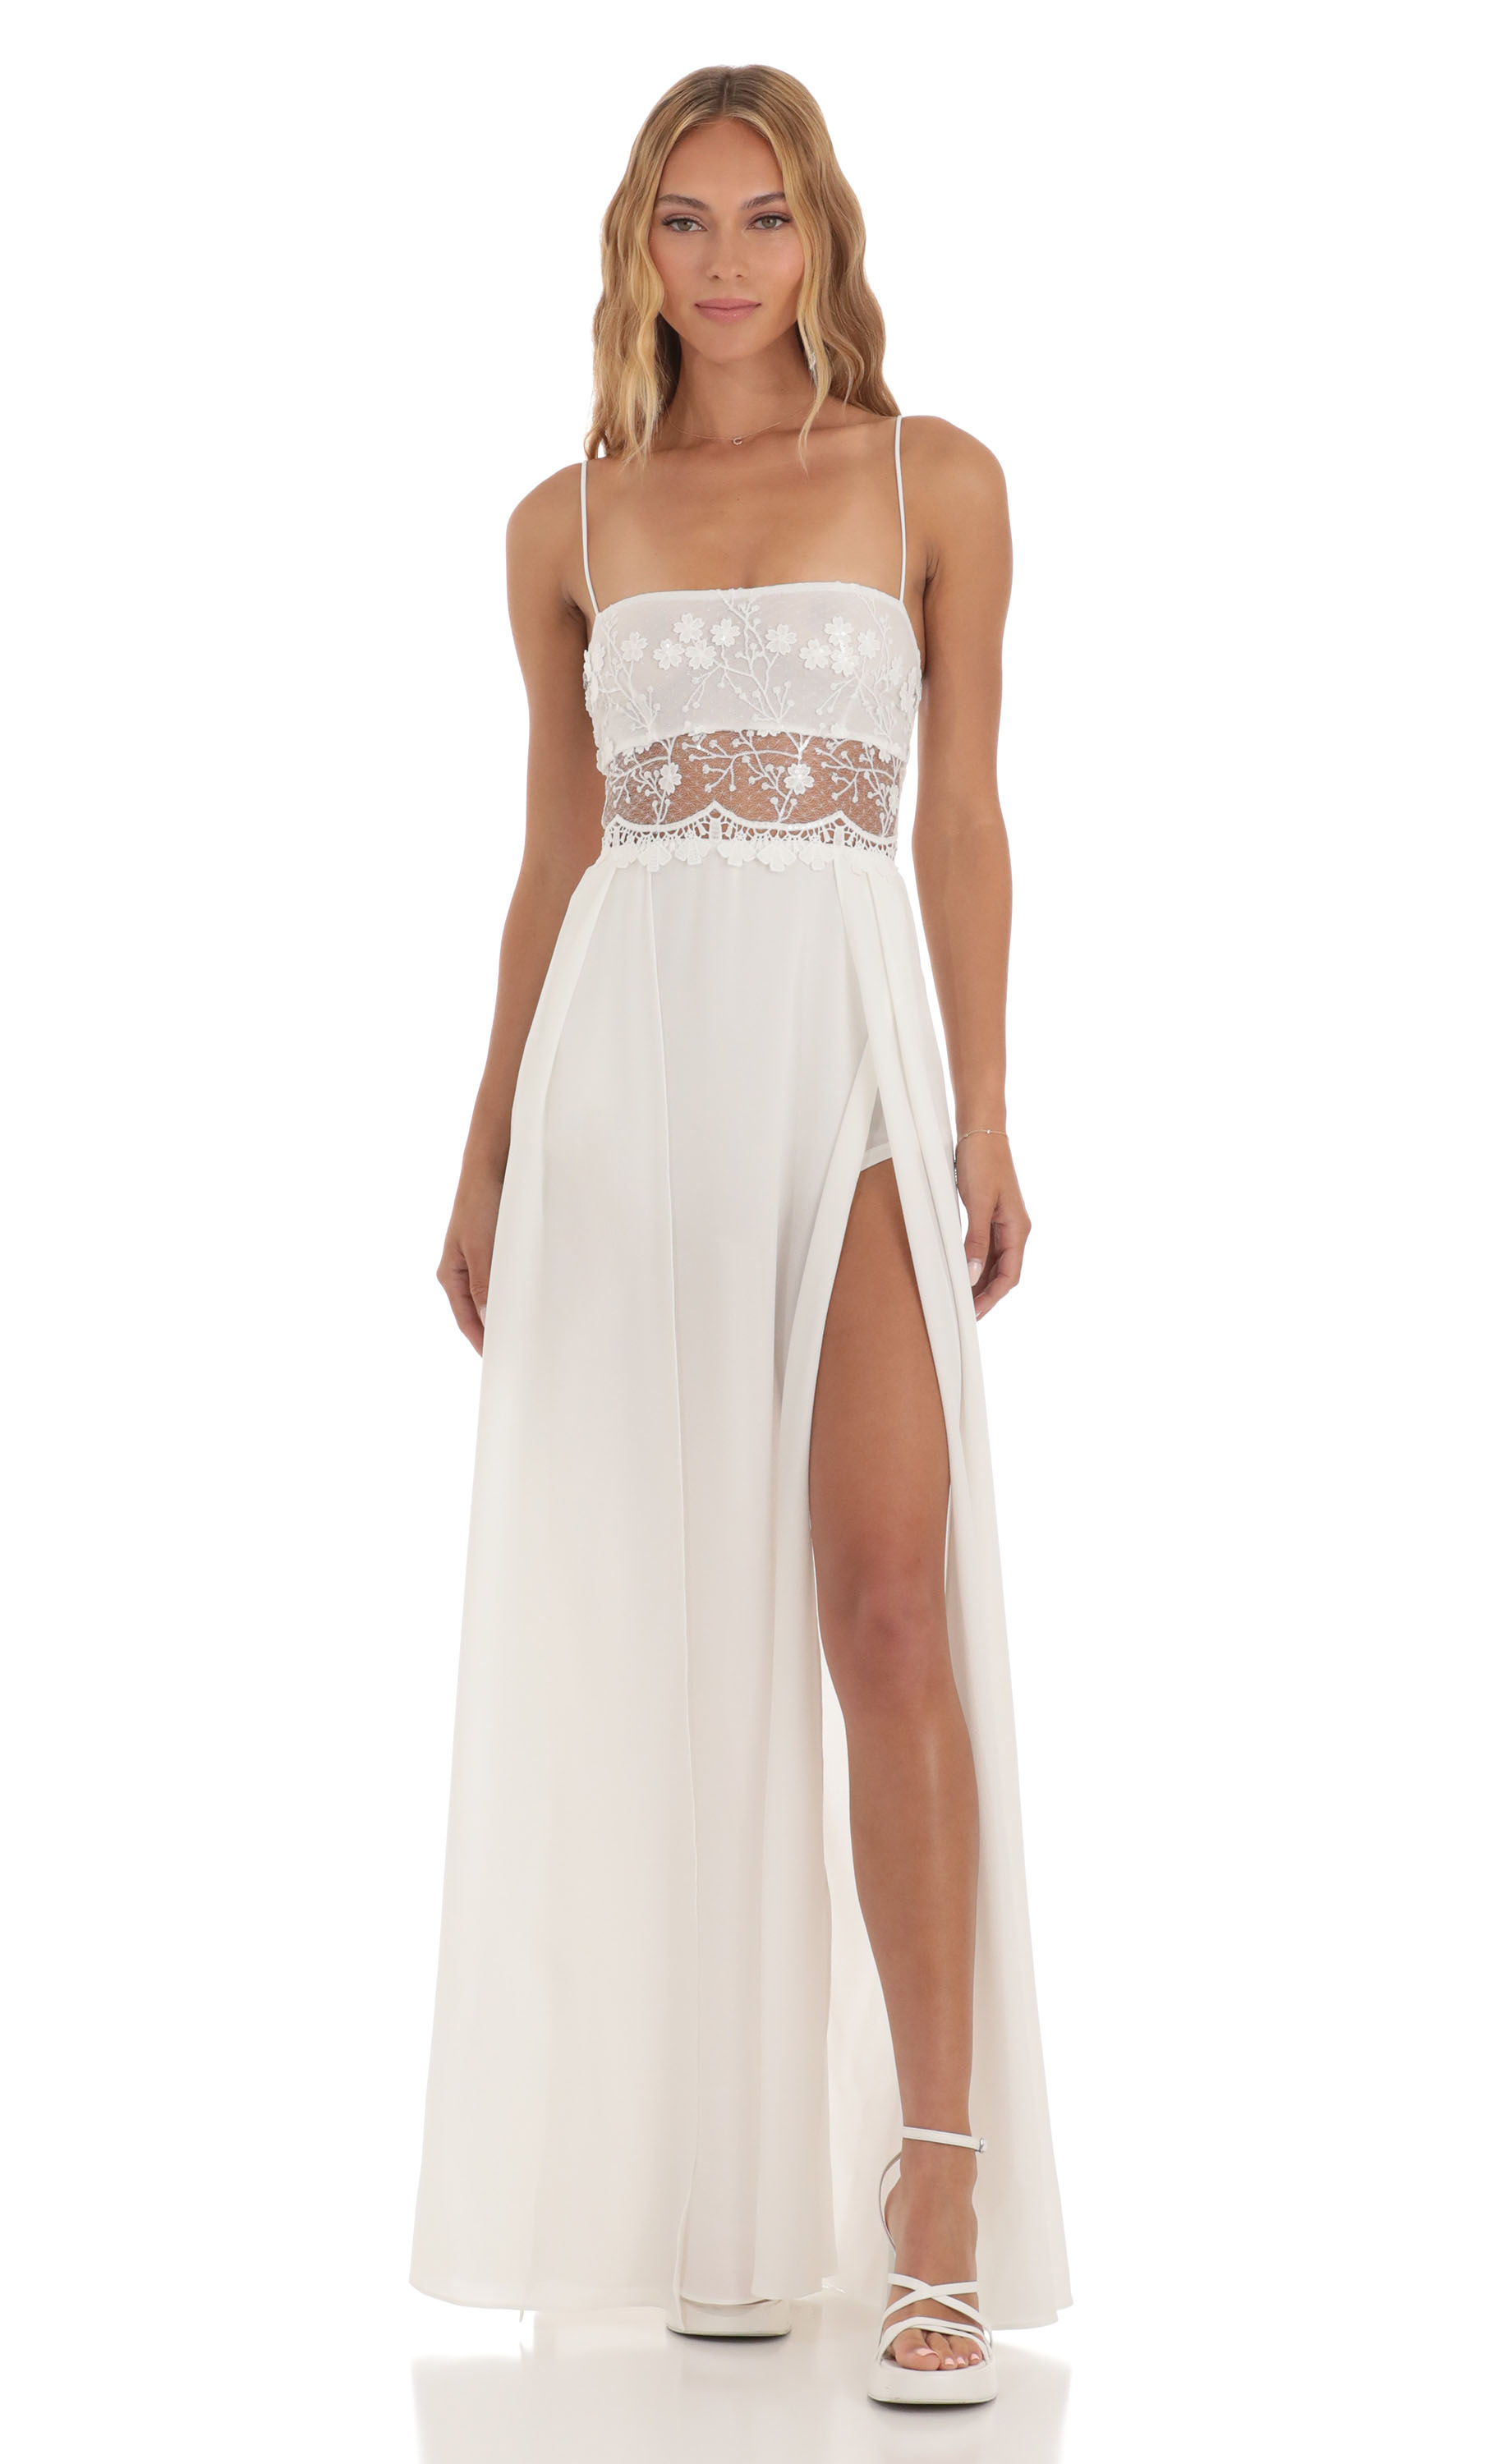 Lace Sequin Maxi Dress in White